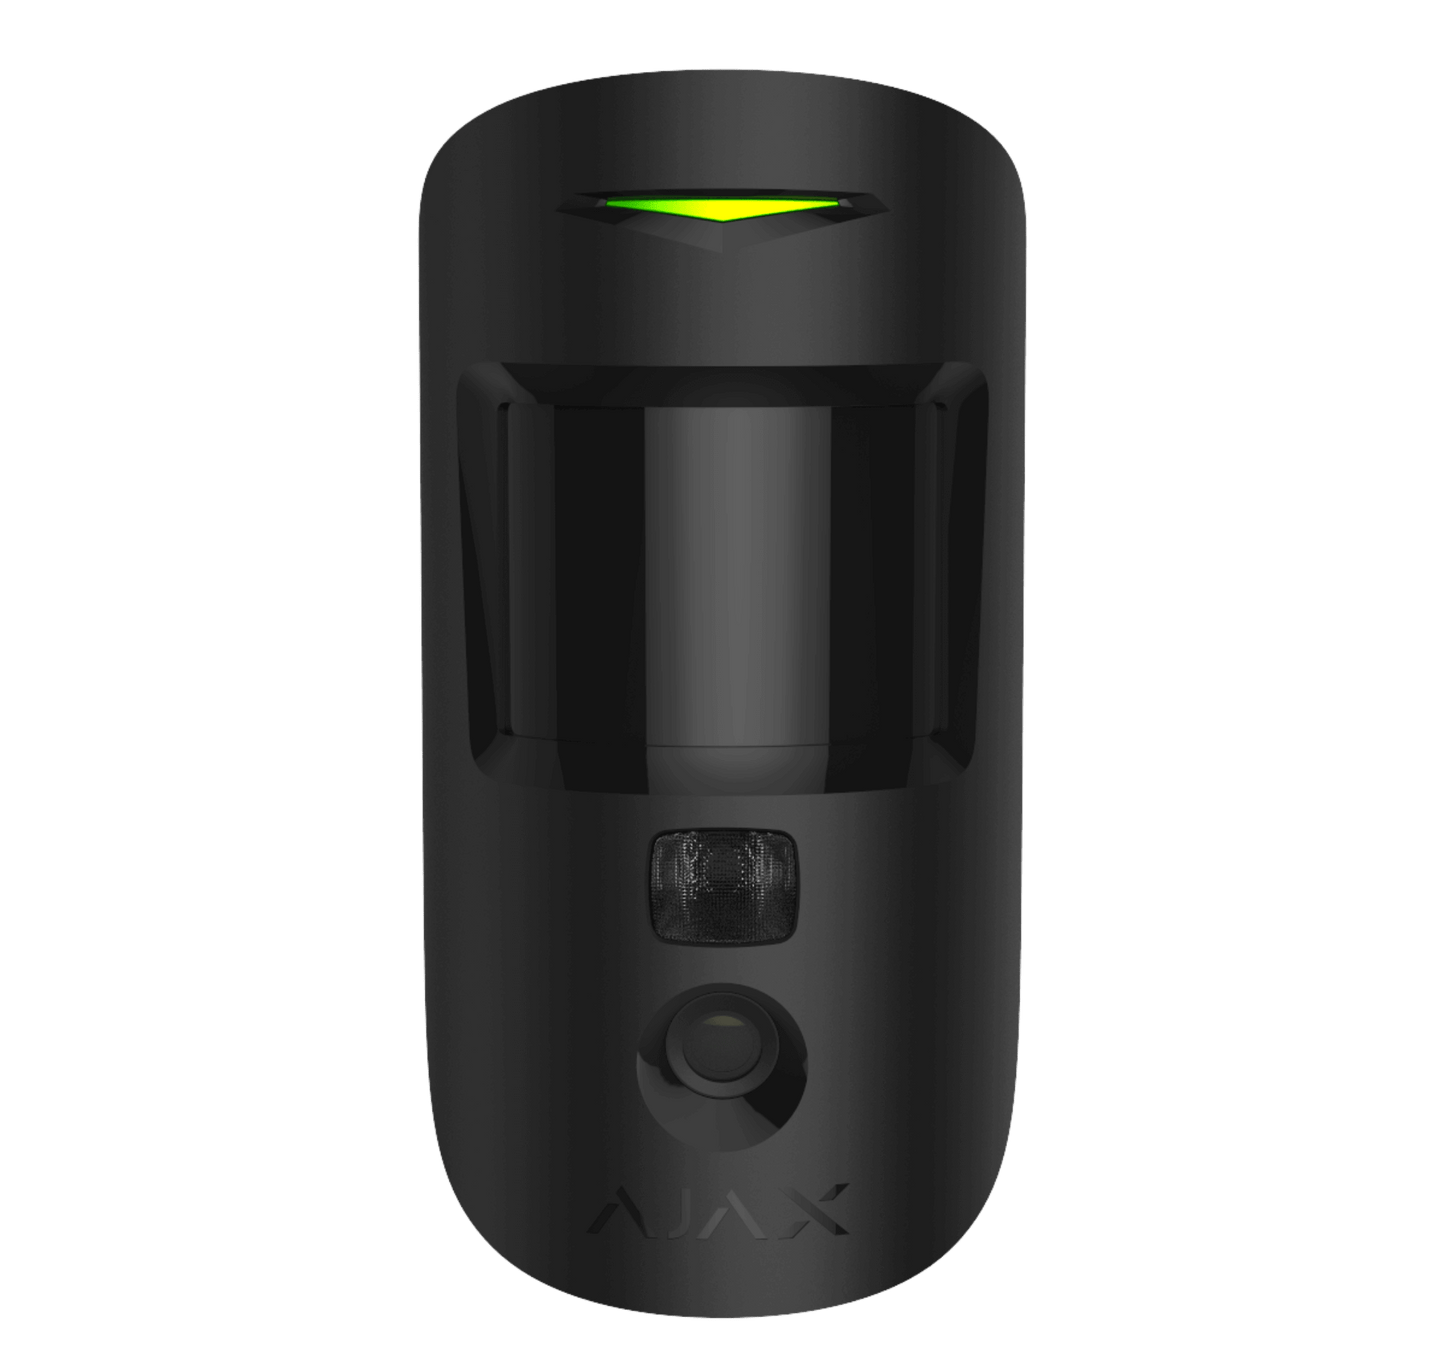 Black Ajax MotionCam (PhoD) a wireless motion detector with a built in camera for home and business security, 110 × 65 × 50 mm in size, 86 grams in weight. front view of device